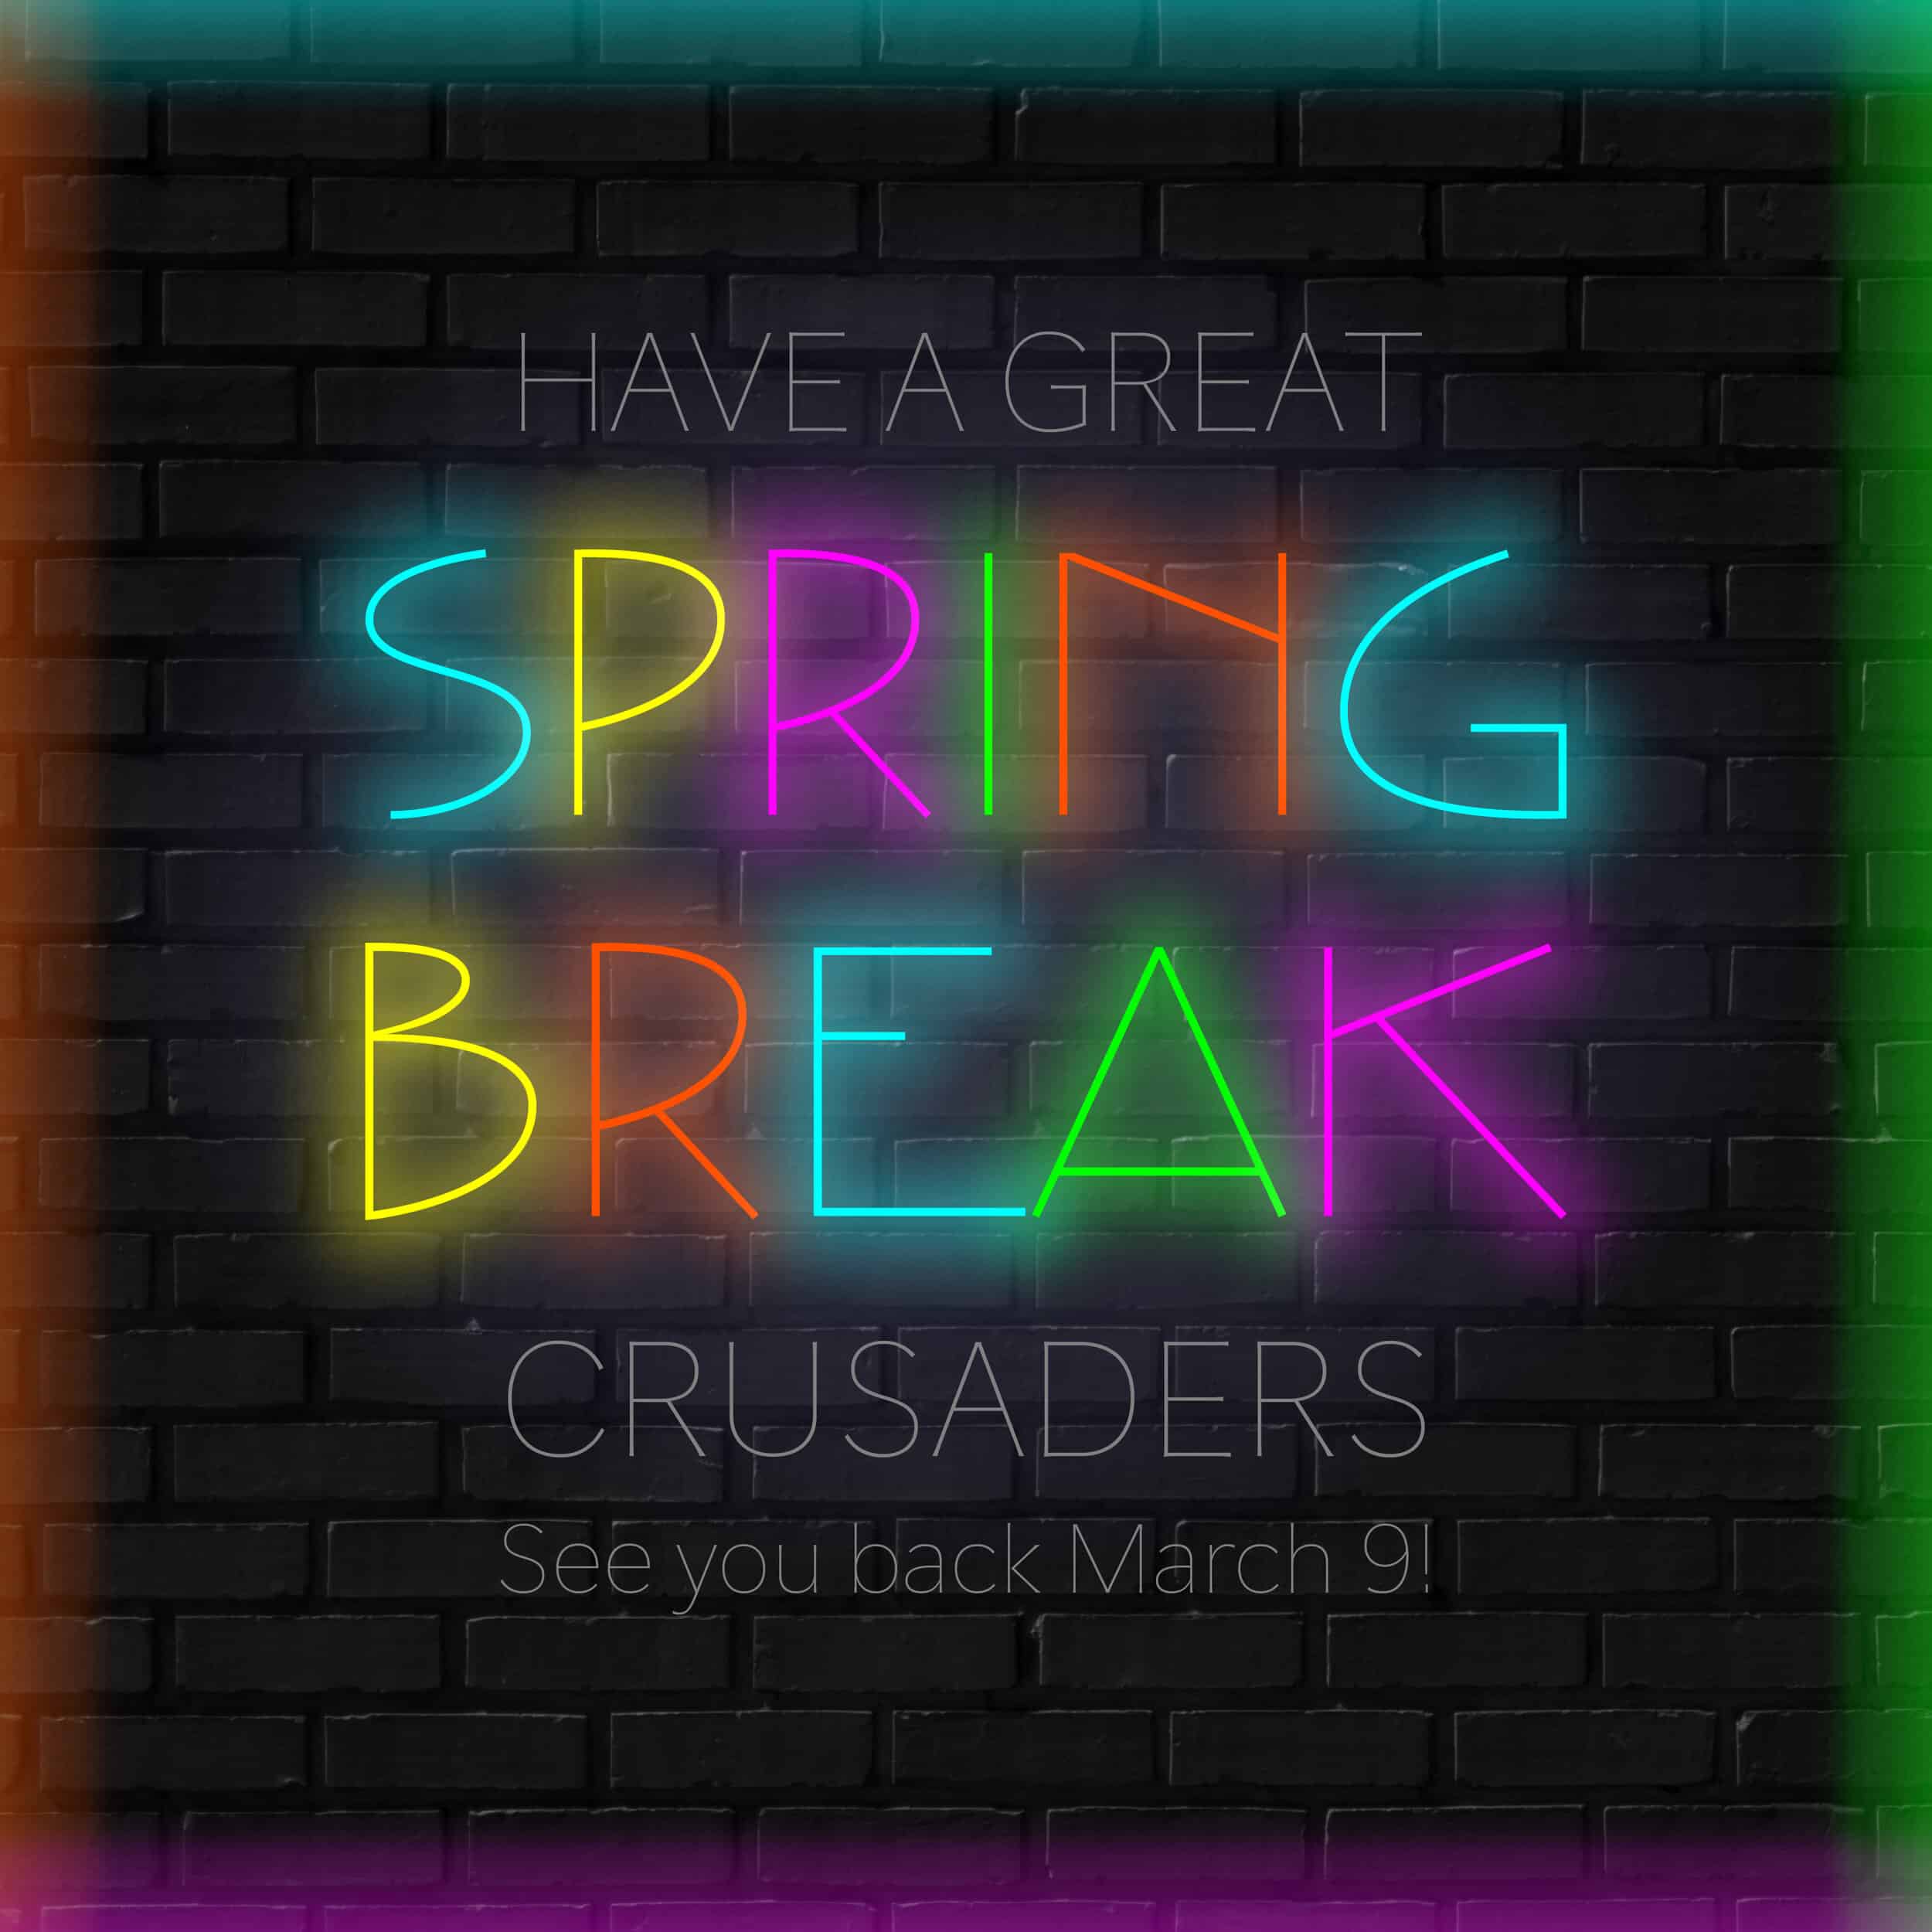 Have a safe and fun Spring Break, Crusaders. We will see you back March 9.